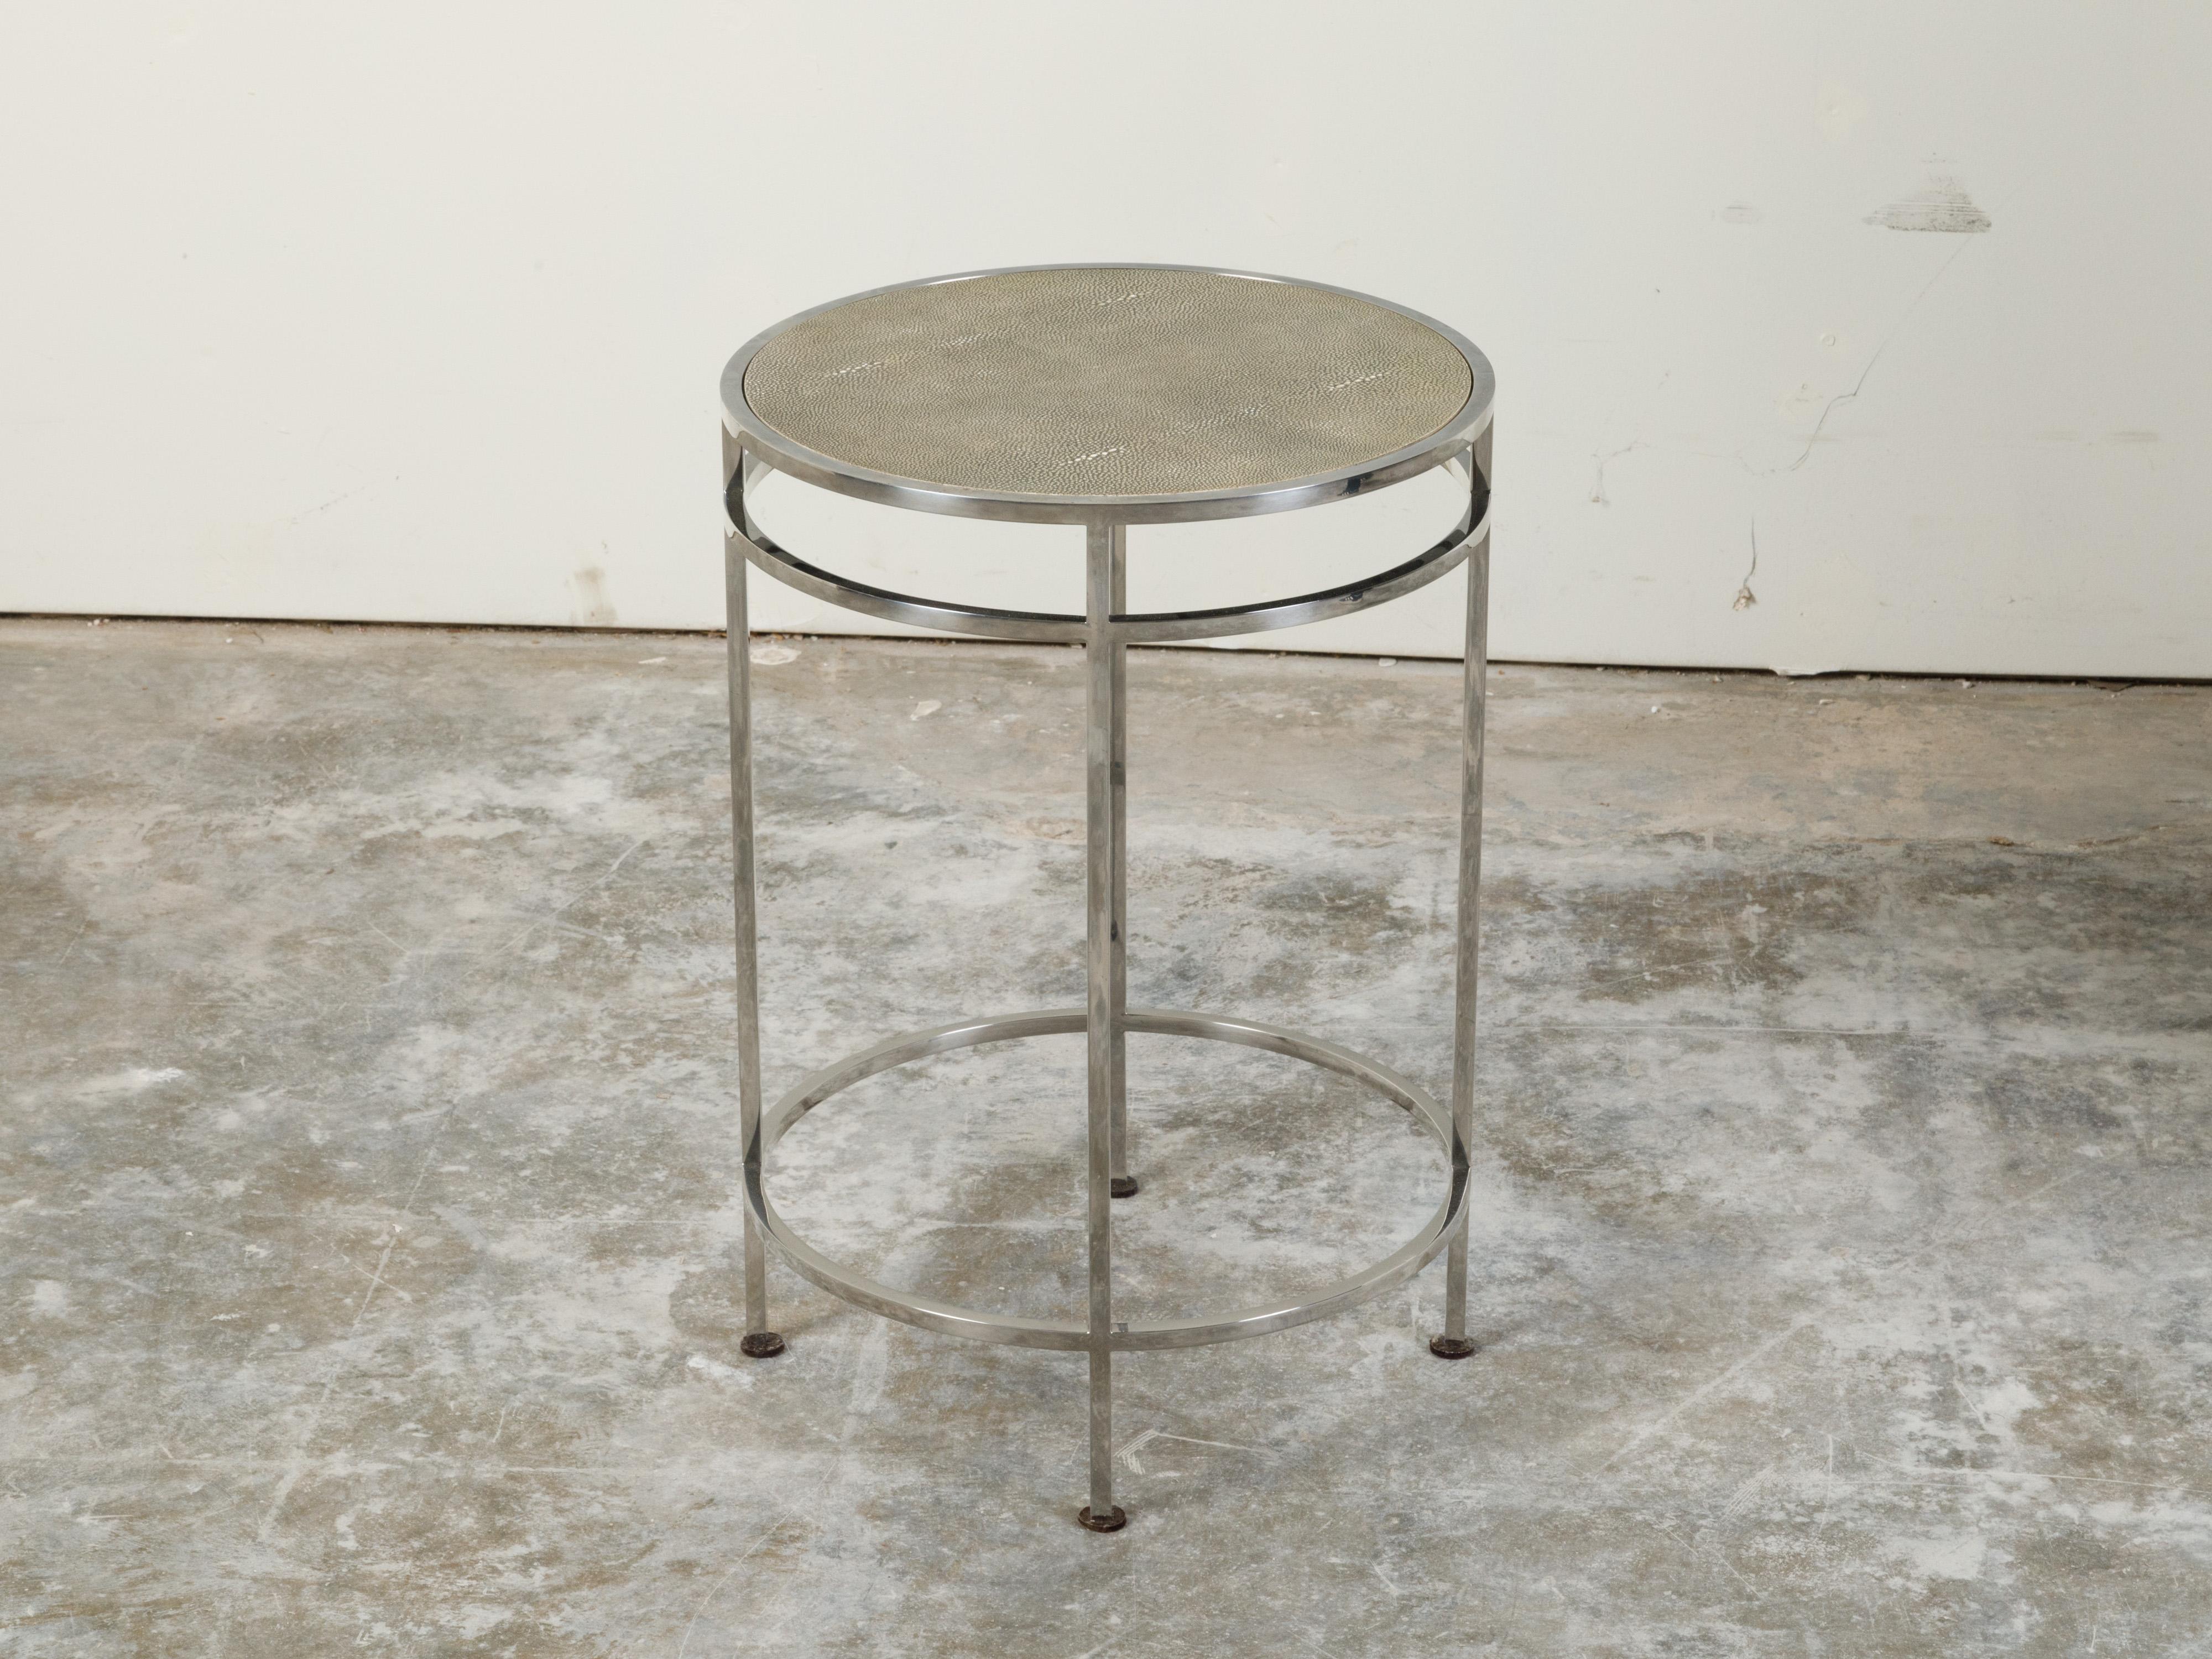 20th Century Italian Steel Side Table with Shagreen Covered Top and Circular Stretchers For Sale